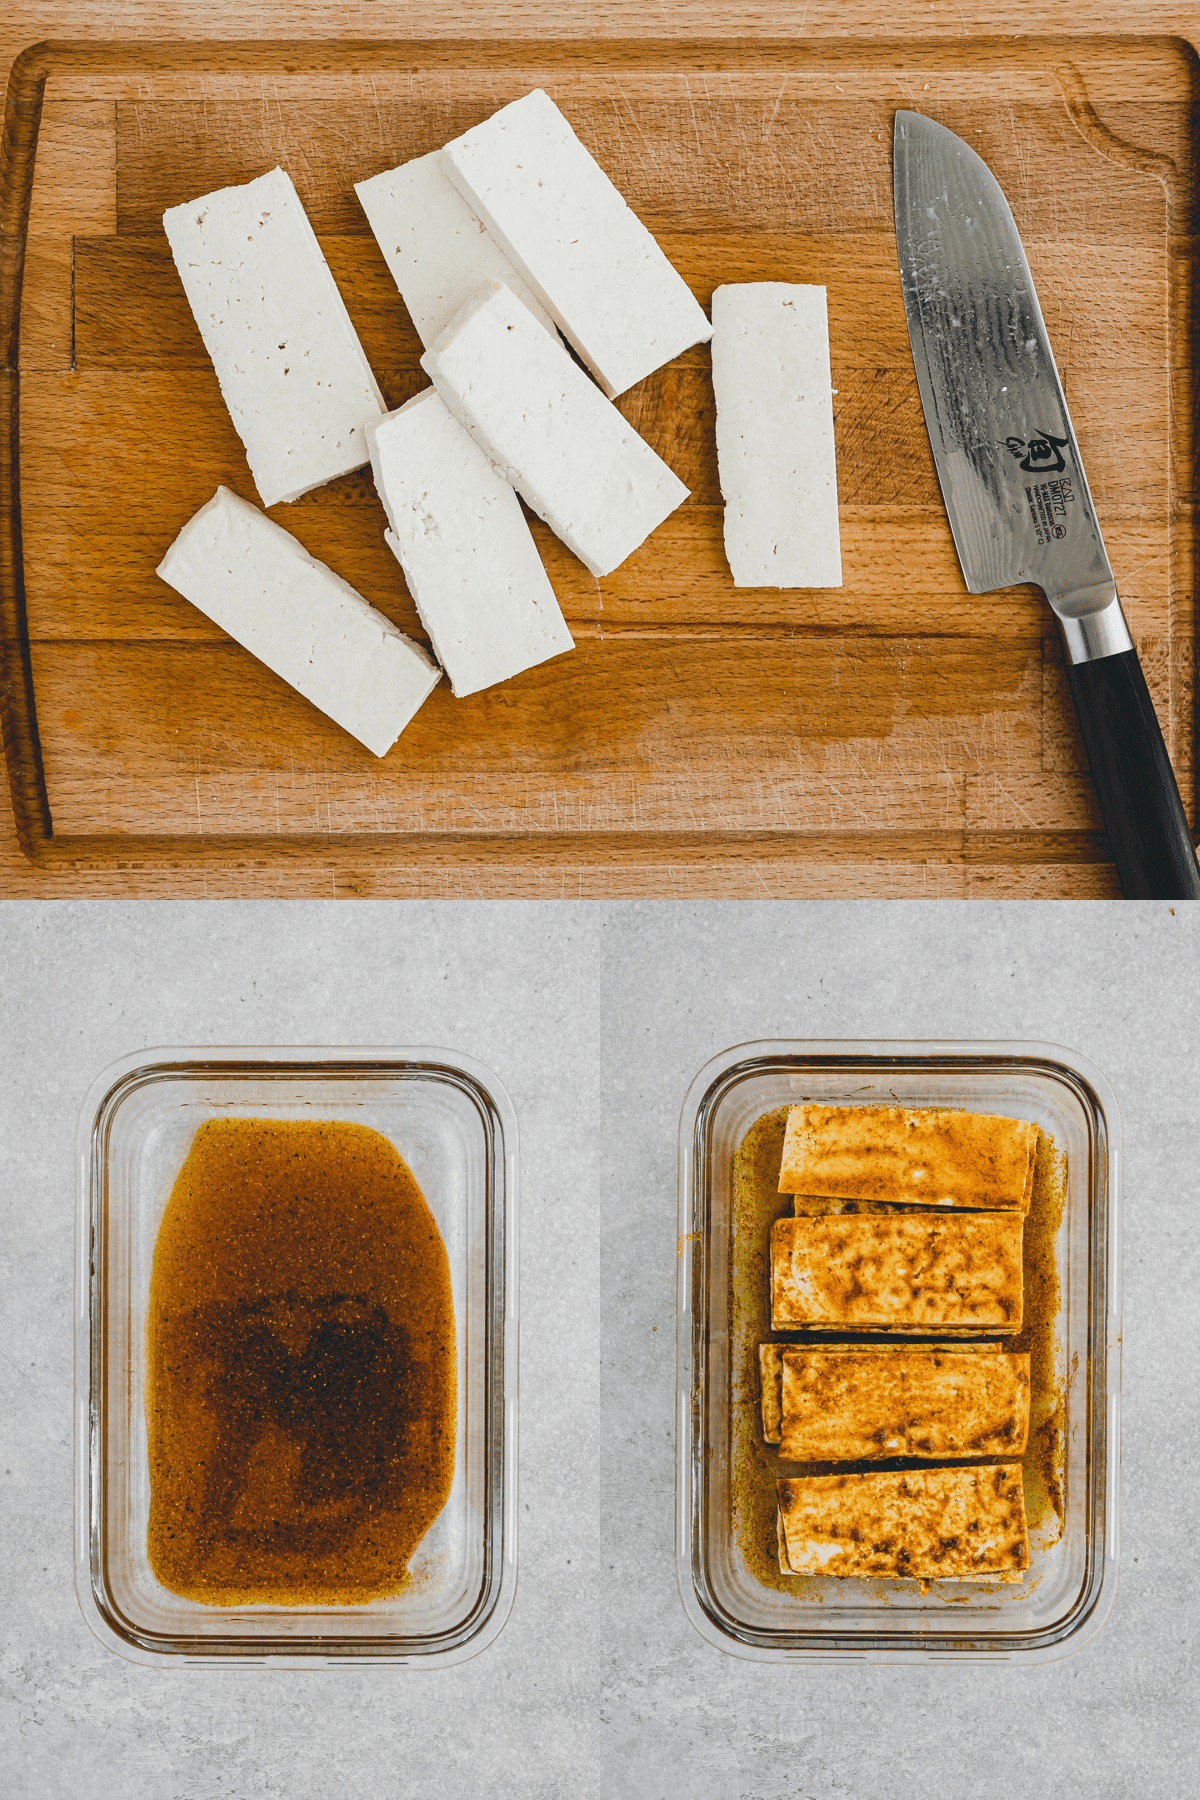 Three pictures: top picture is a top view of a stack of tofu steak slices with a knife sitting next to them on a wooden chopping board; bottom left is a top view of a glass dish with marinade in it; bottom right is a top view of tofu steaks in the marinade. 